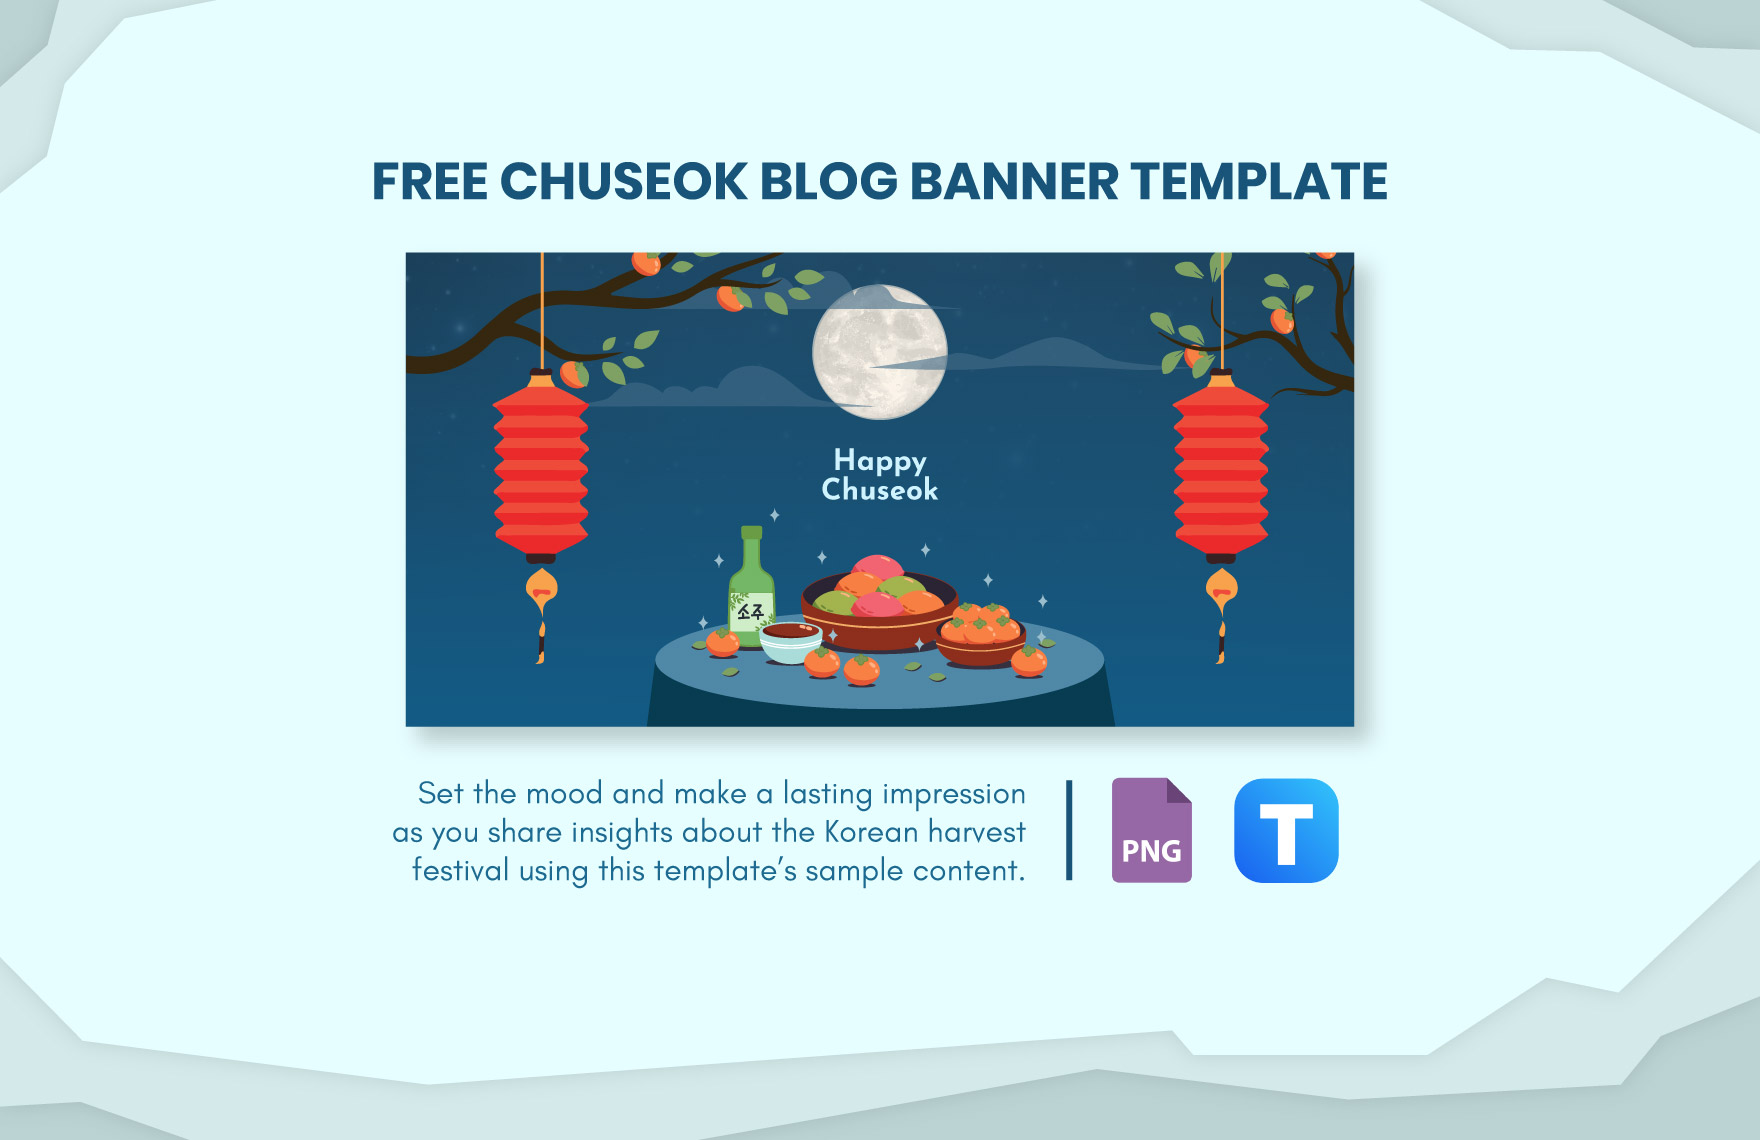 Free Chuseok Blog Banner Template in PNG